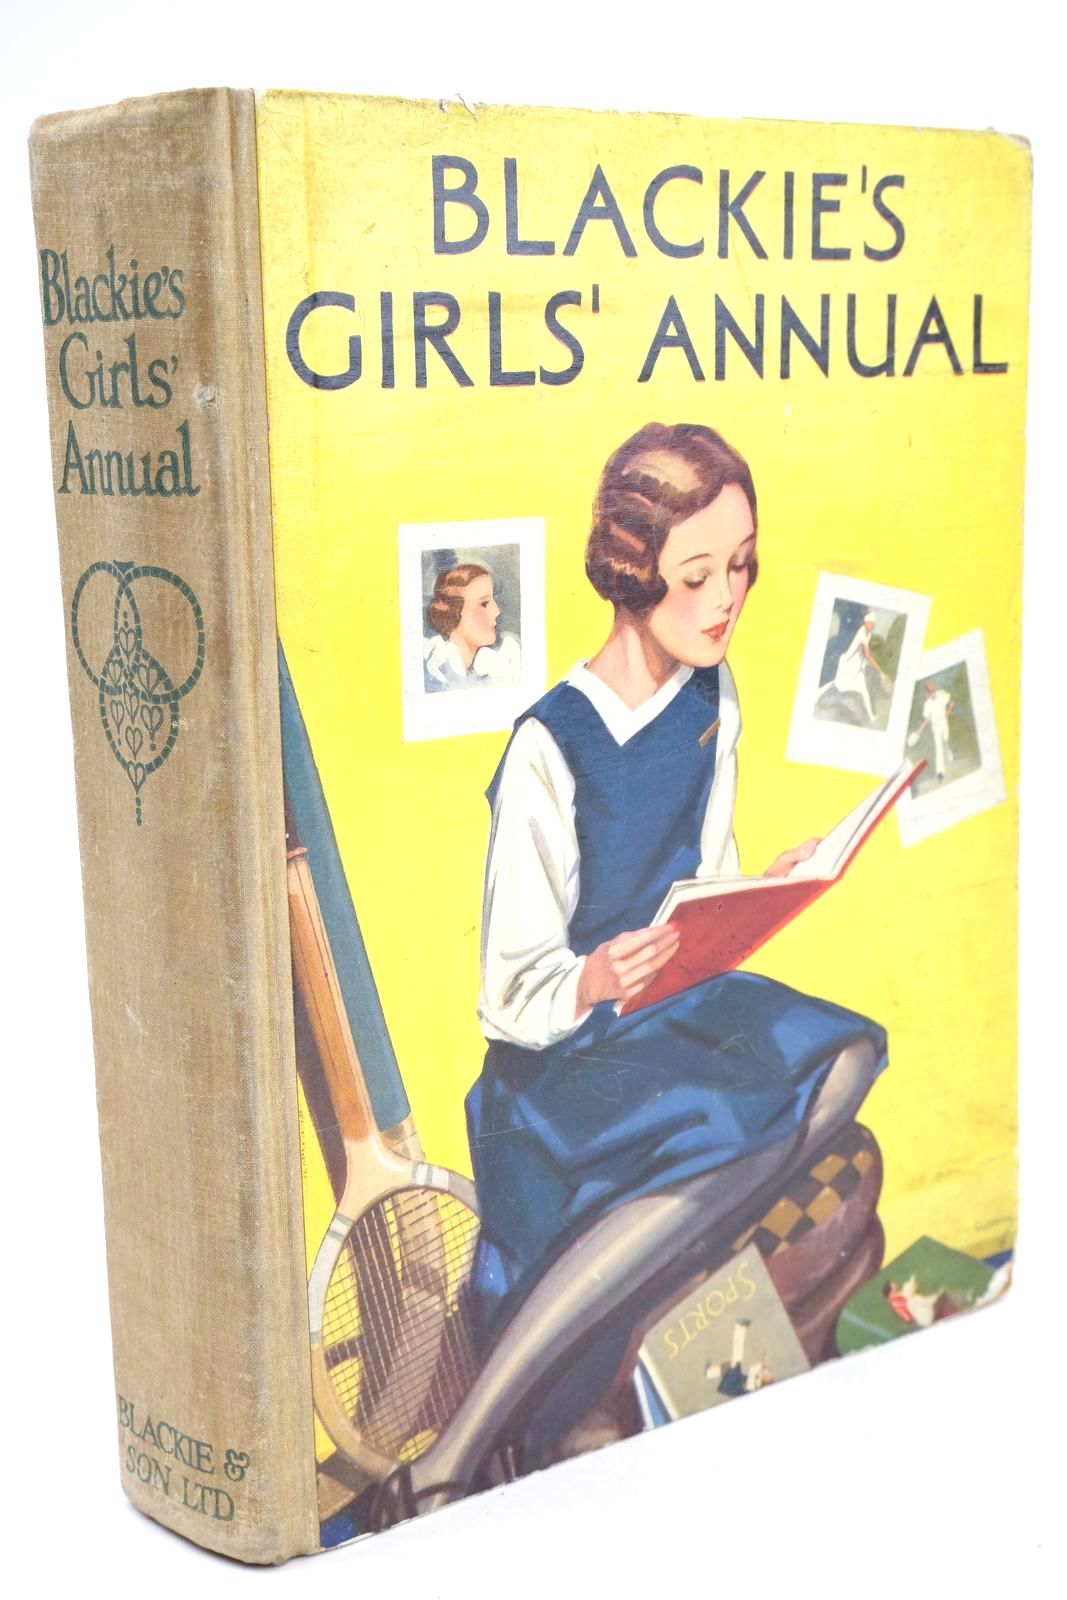 Photo of BLACKIE'S GIRLS' ANNUAL written by Joyce, Frances Cobb, Ruth Joan, Natalie Marchant, Bessie Gould, Elizabeth et al, illustrated by Bestall, Alfred Cobb, Ruth Brock, C.E. Hilder, Edith Hilder, Rowland et al., published by Blackie &amp; Son Ltd. (STOCK CODE: 1324767)  for sale by Stella & Rose's Books